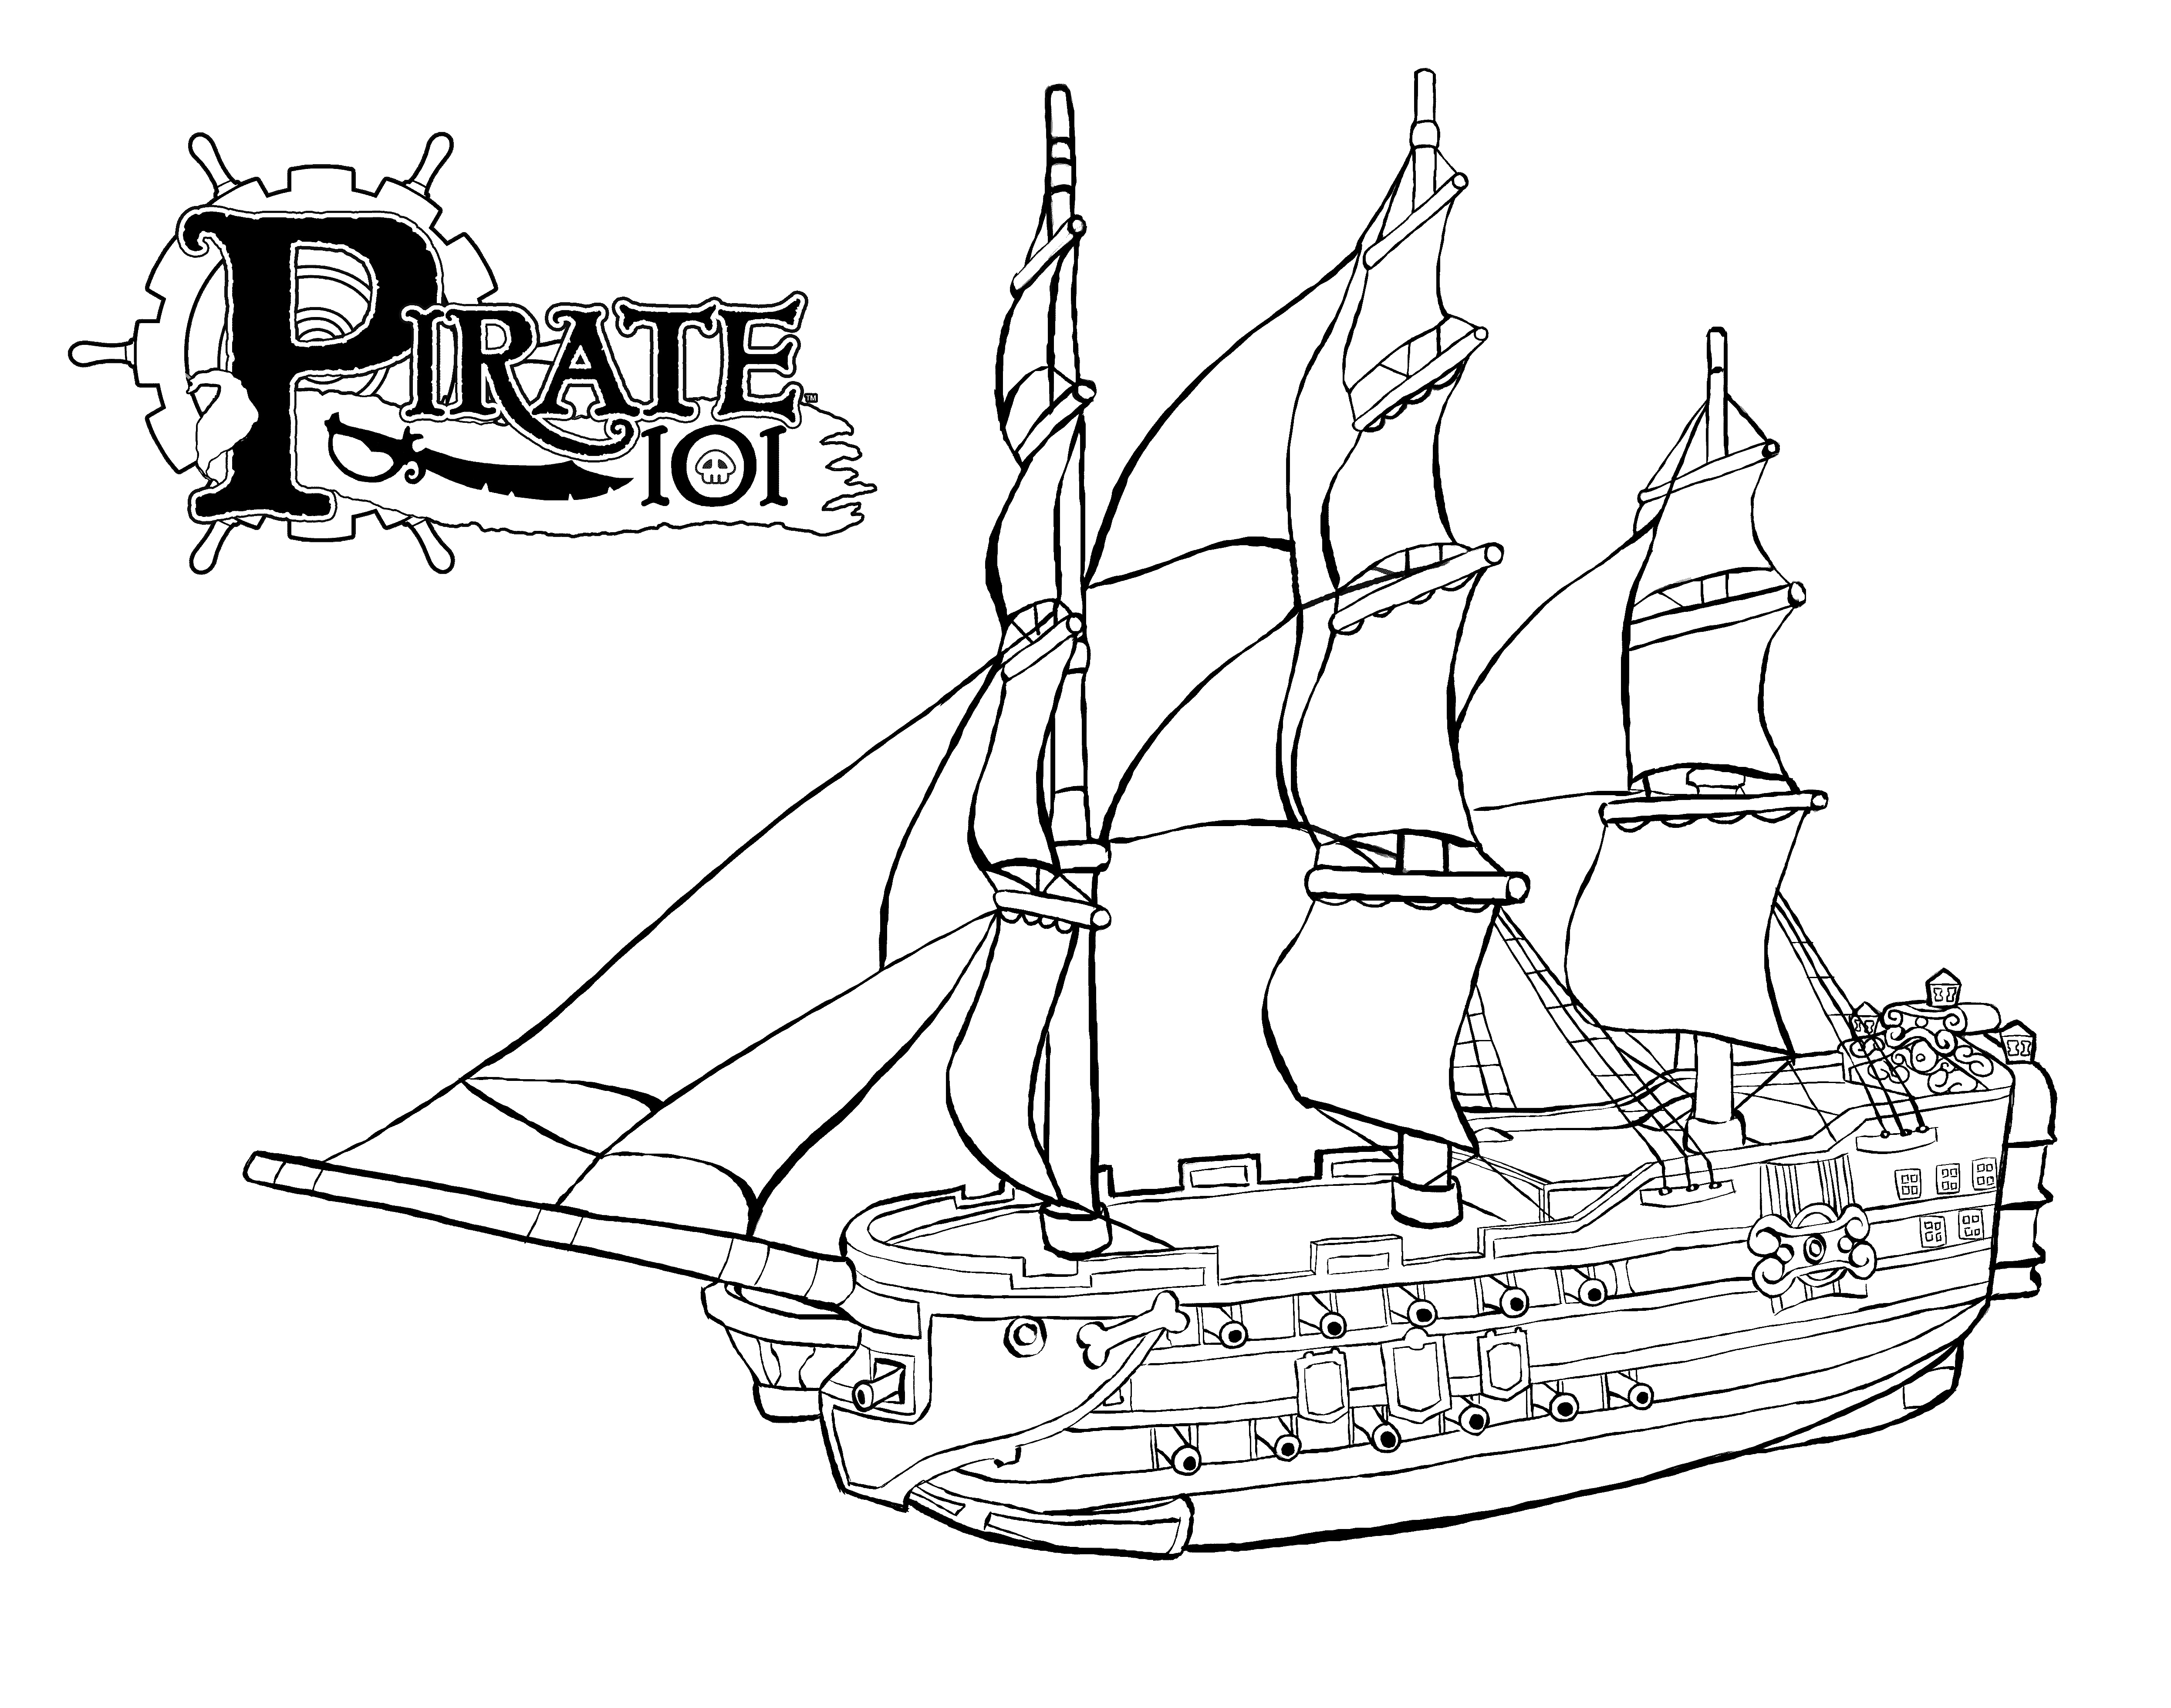 boat coloring navy ship coloring pages at getcoloringscom free coloring boat 